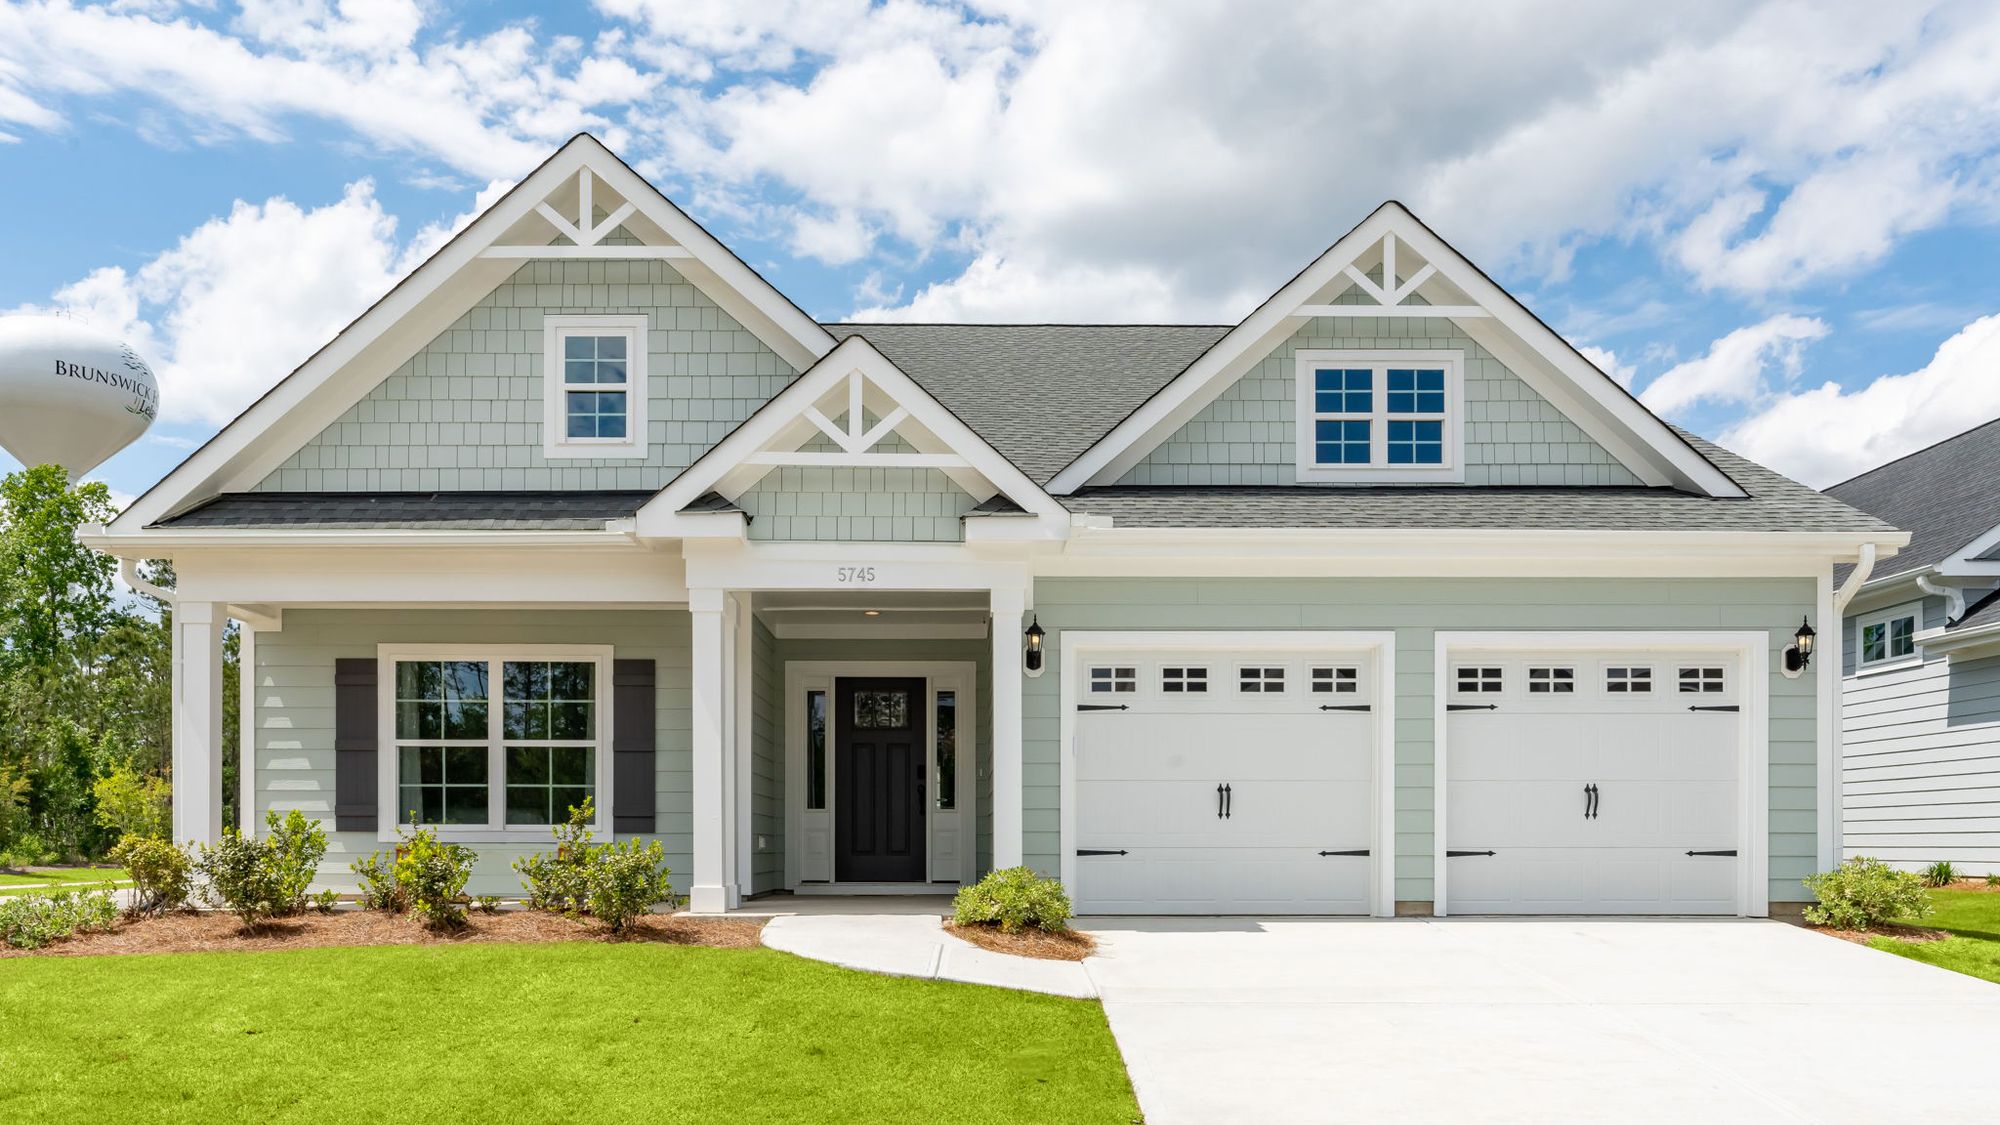 New home for sale in Leland SC featuring Mungo's Edgewood Plan